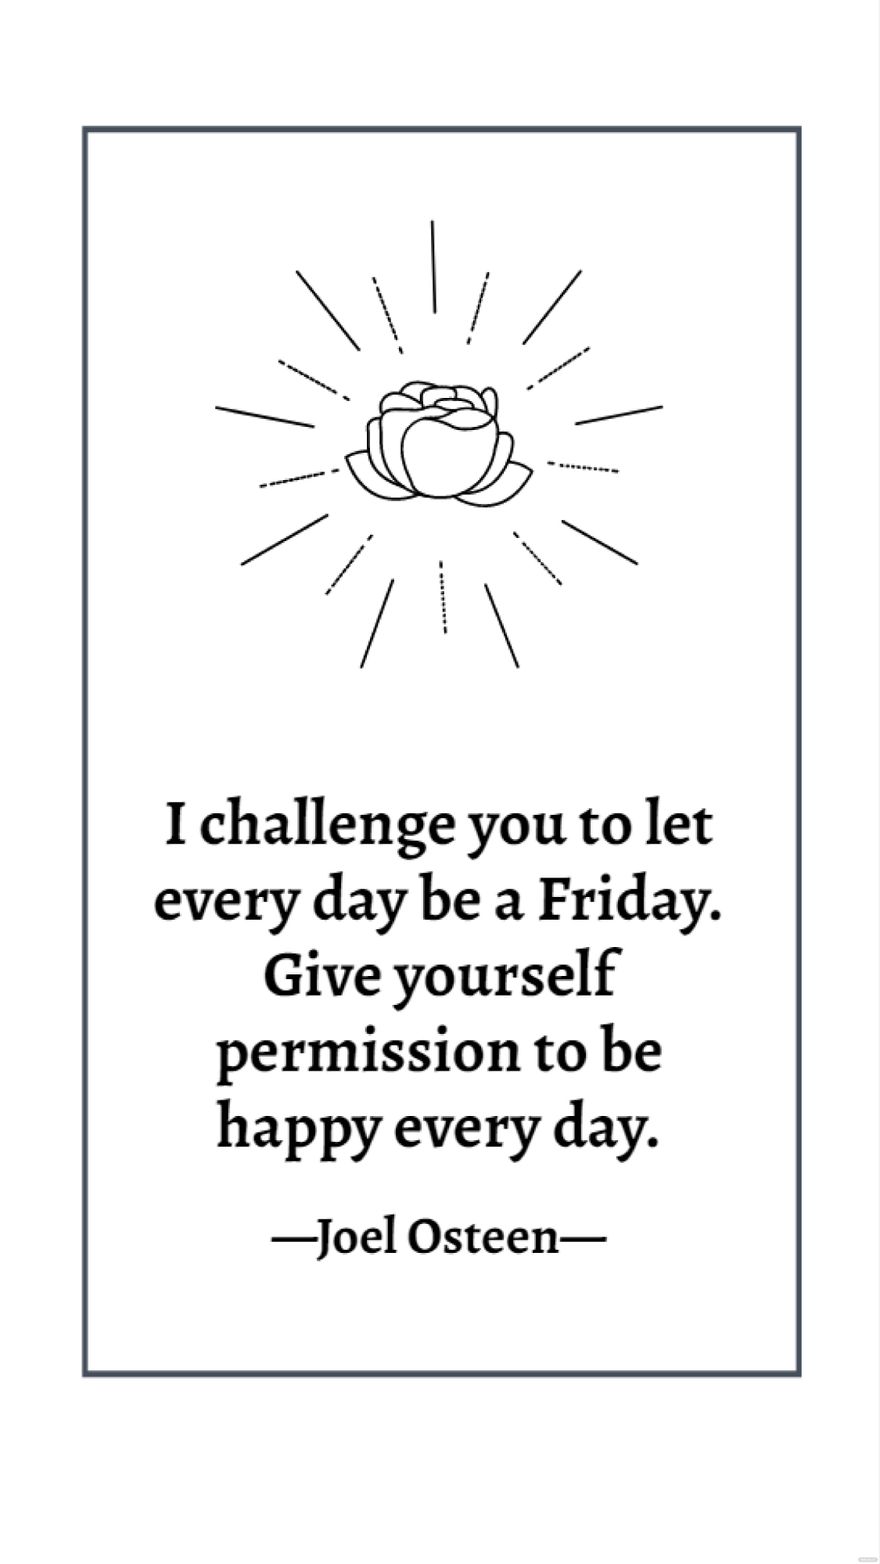 Joel Osteen - I challenge you to let every day be a Friday. Give yourself permission to be happy every day. in JPG